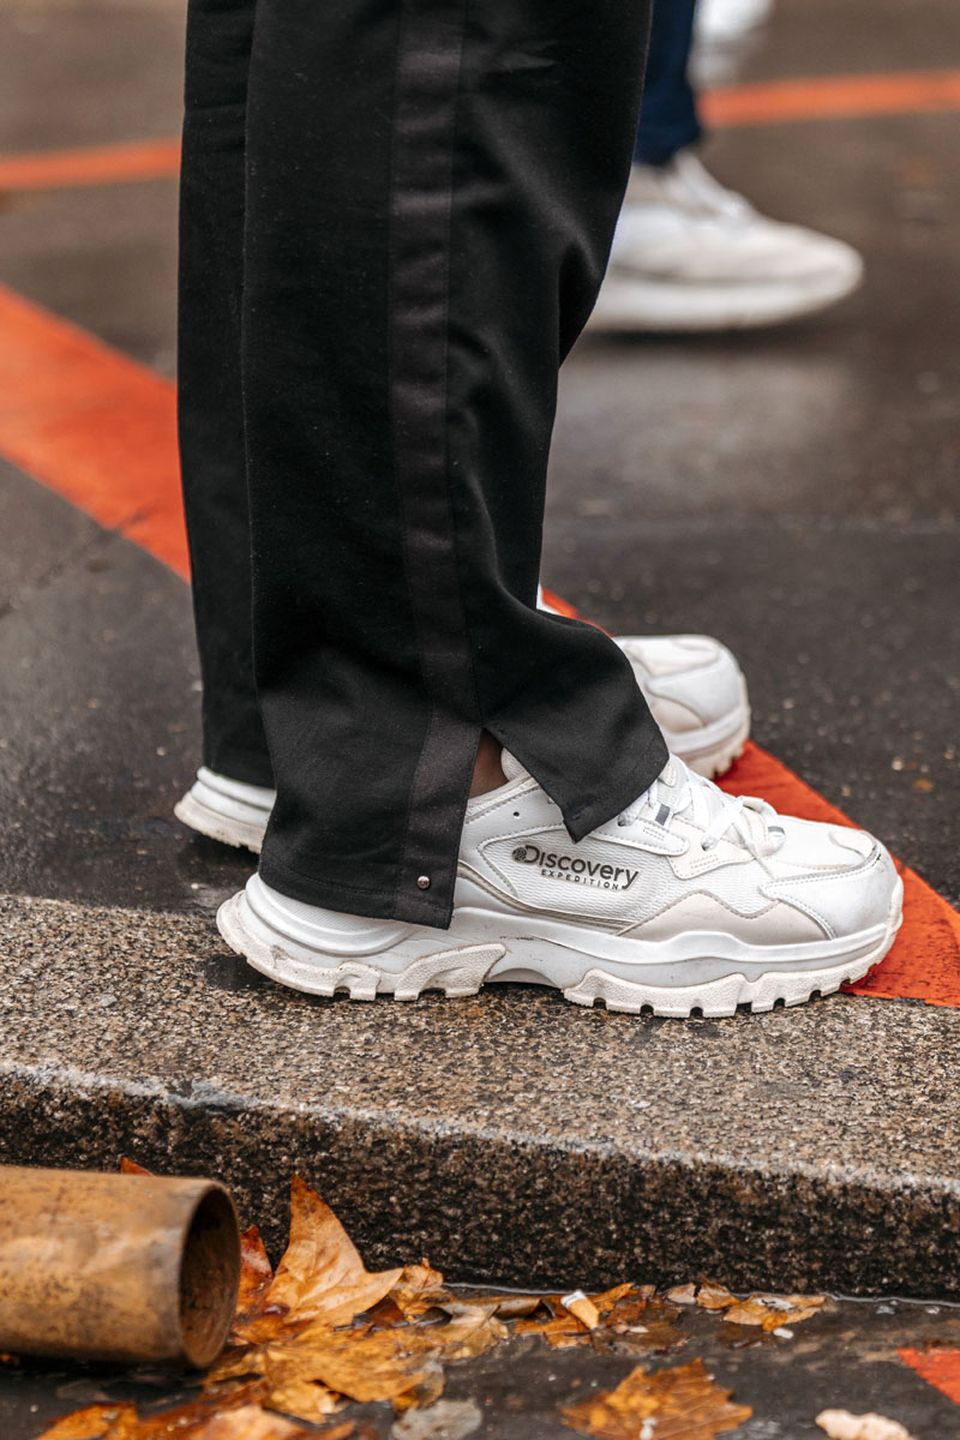 Chunky Sneakers Are Still All the Rage at Paris Fashion Week